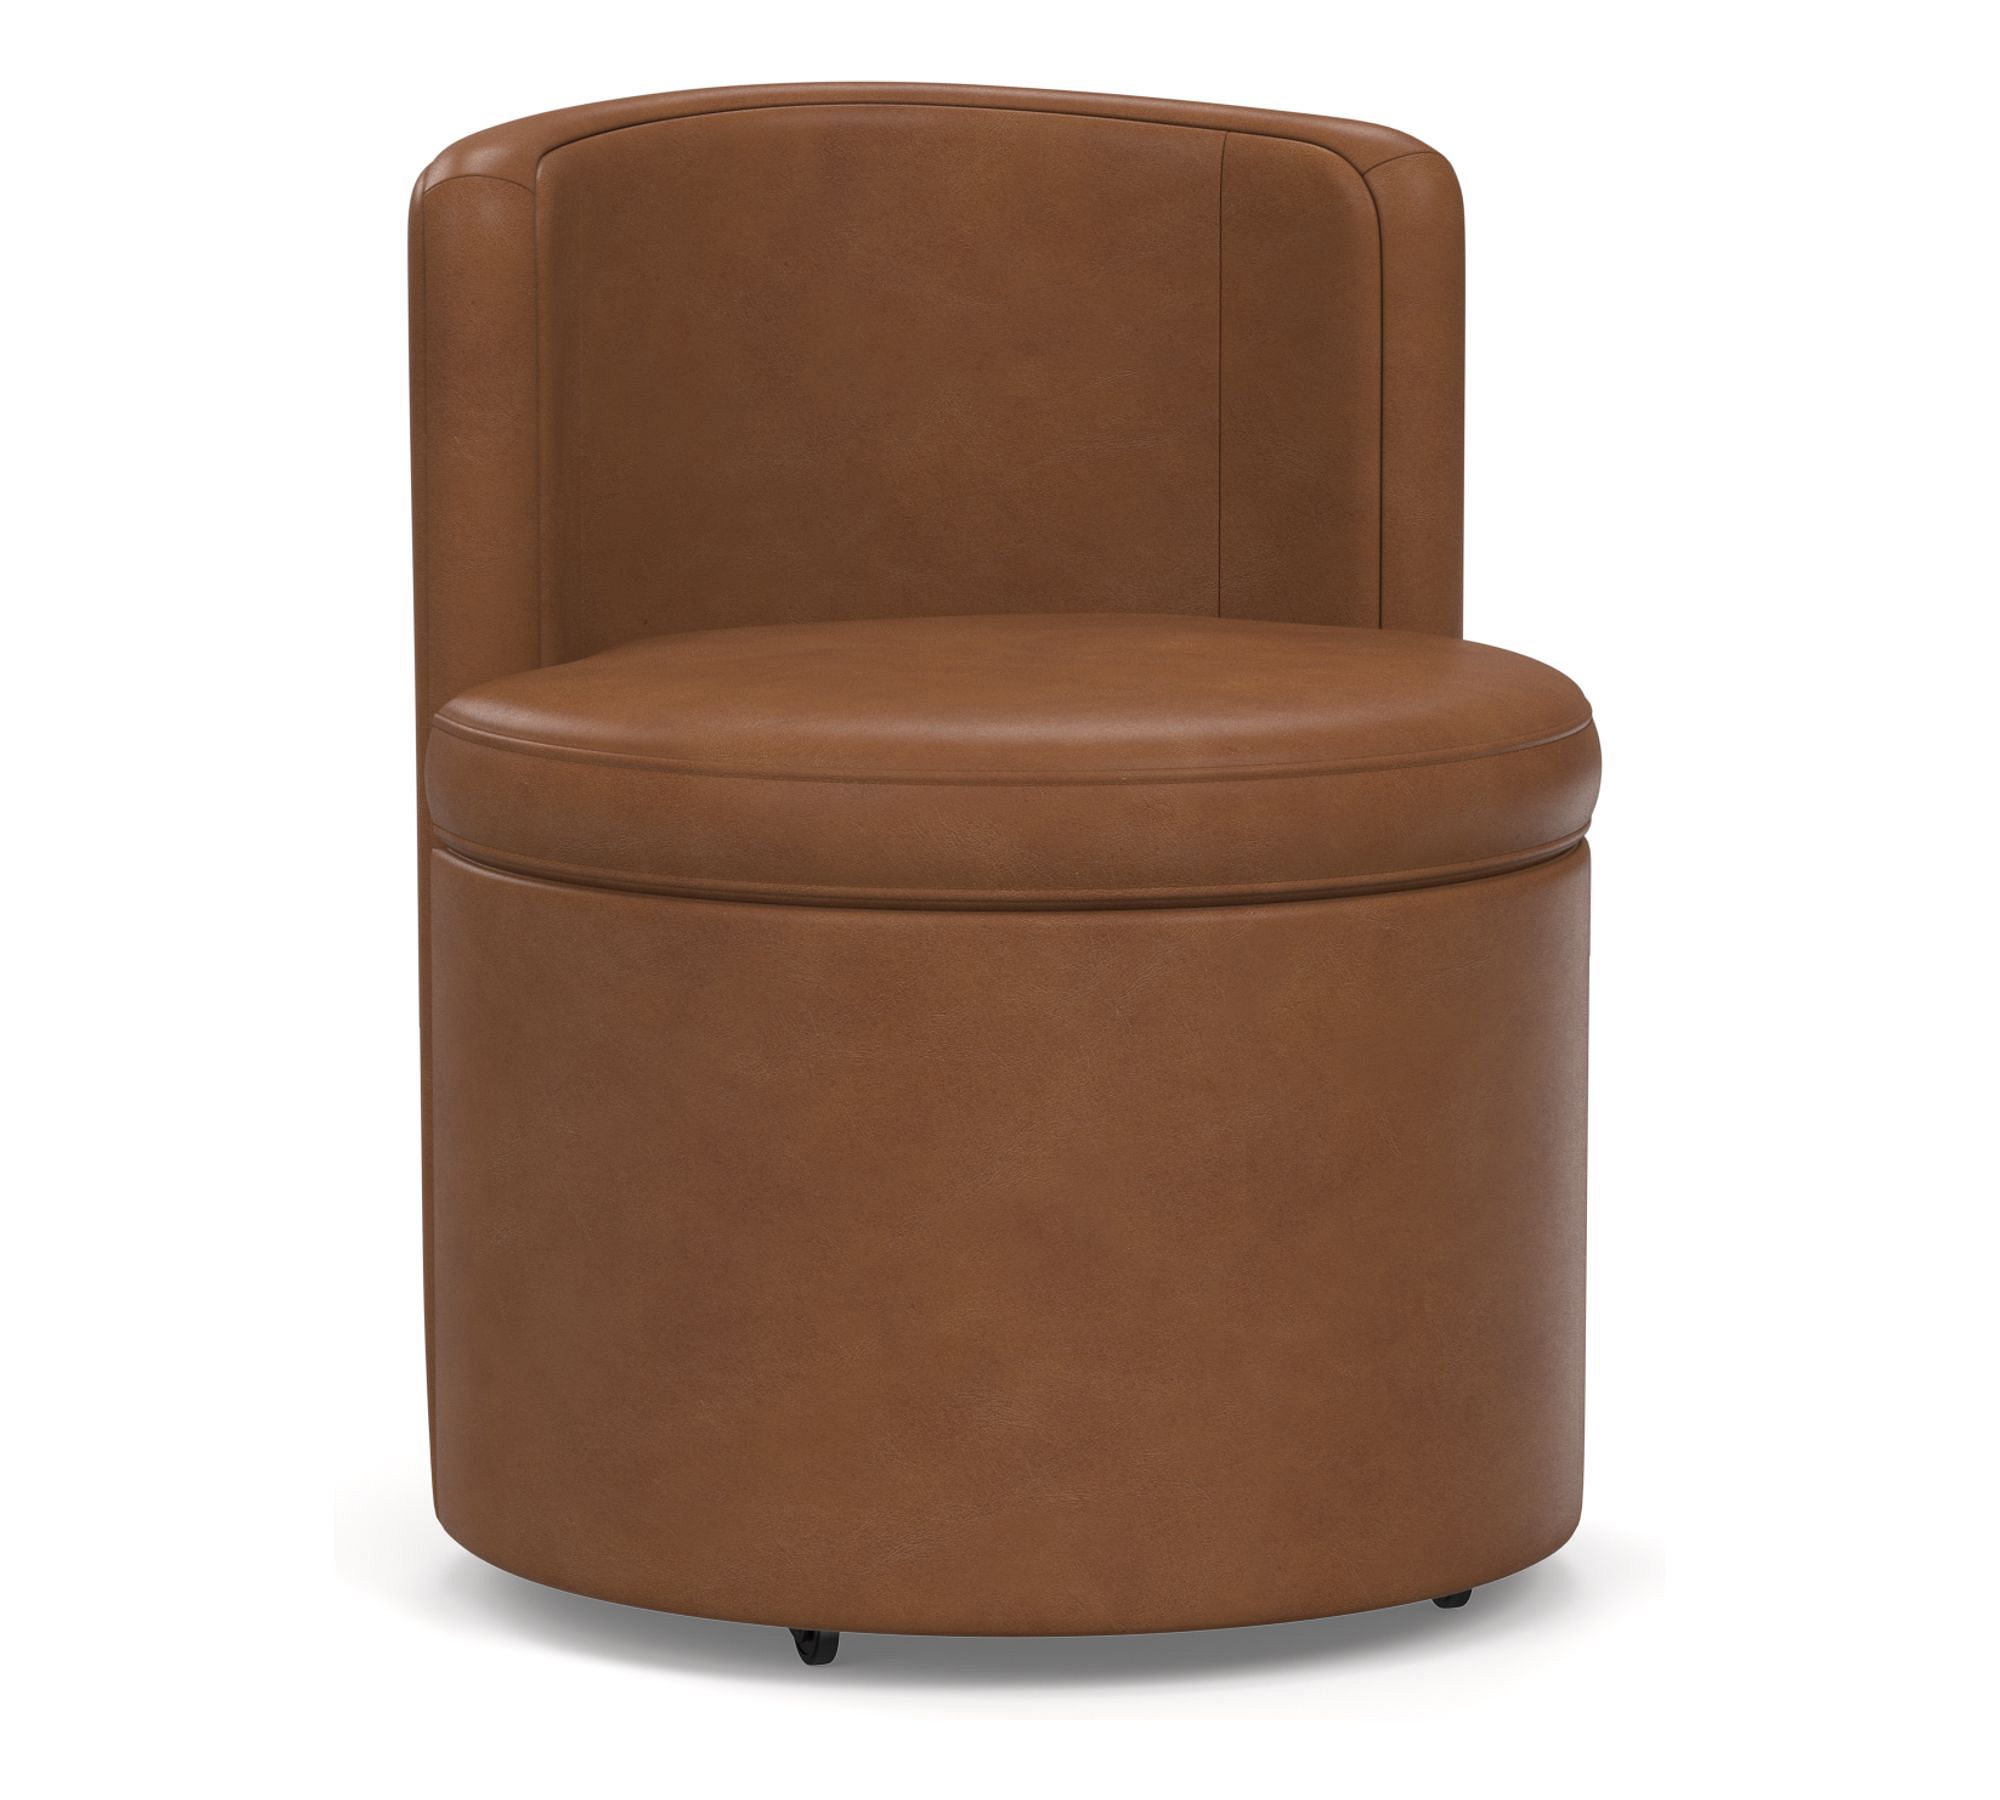 Balboa Leather Dining Chair